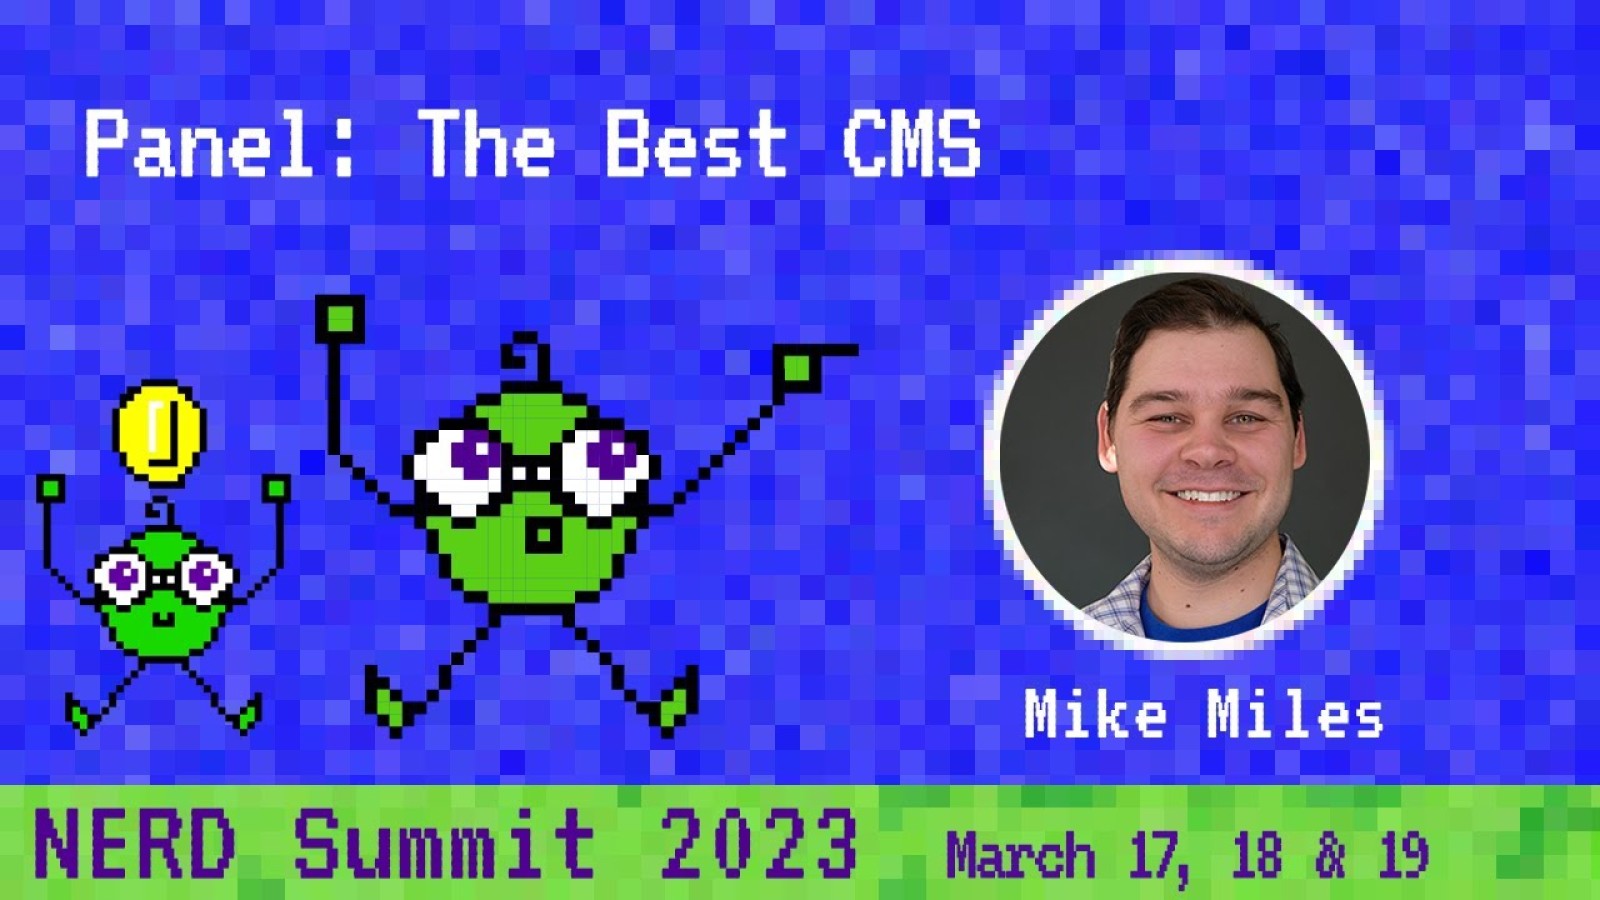 The Best CMS (Panel Moderator) by Michael Miles